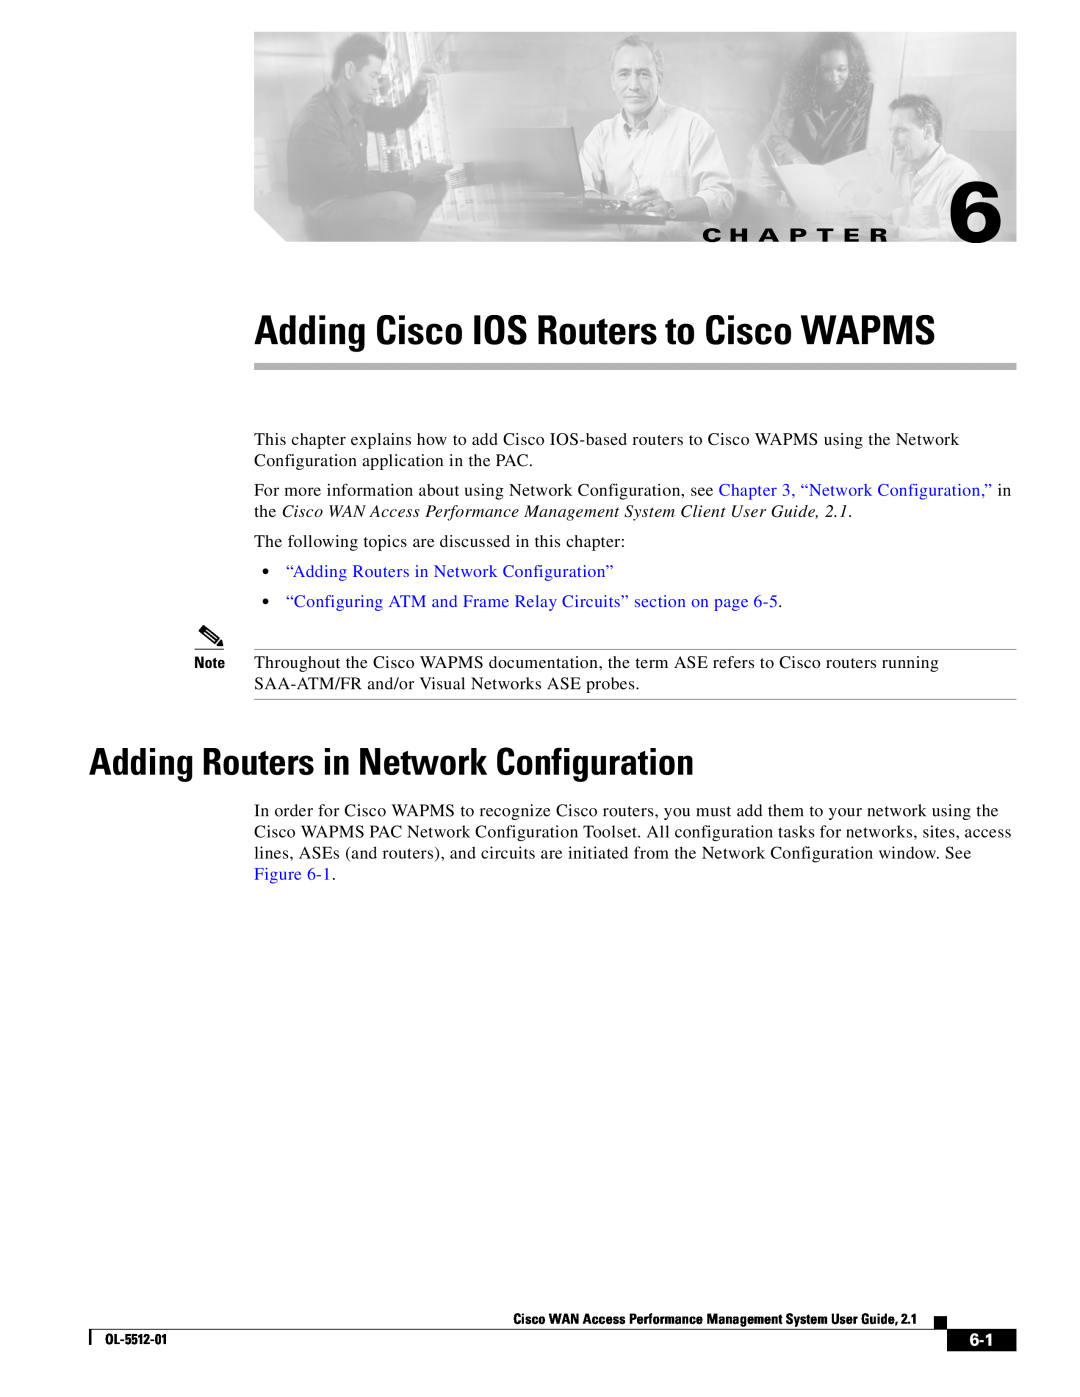 Cisco Systems OL-5512-01 manual Adding Routers in Network Configuration, Adding Cisco IOS Routers to Cisco WAPMS 